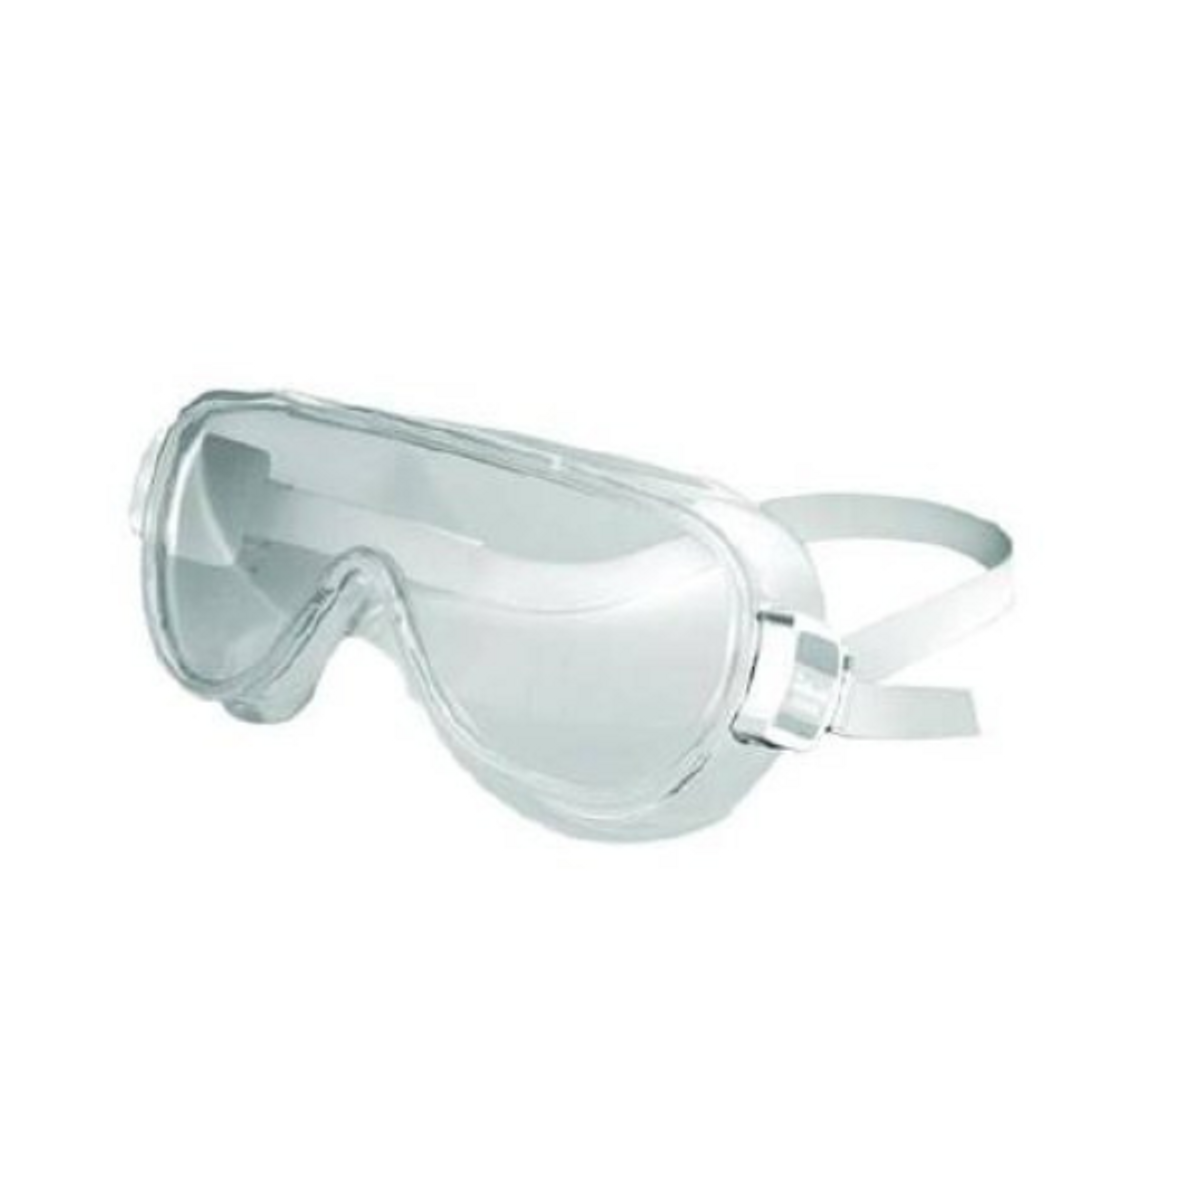 Molnlycke Barrier Protective Glasses